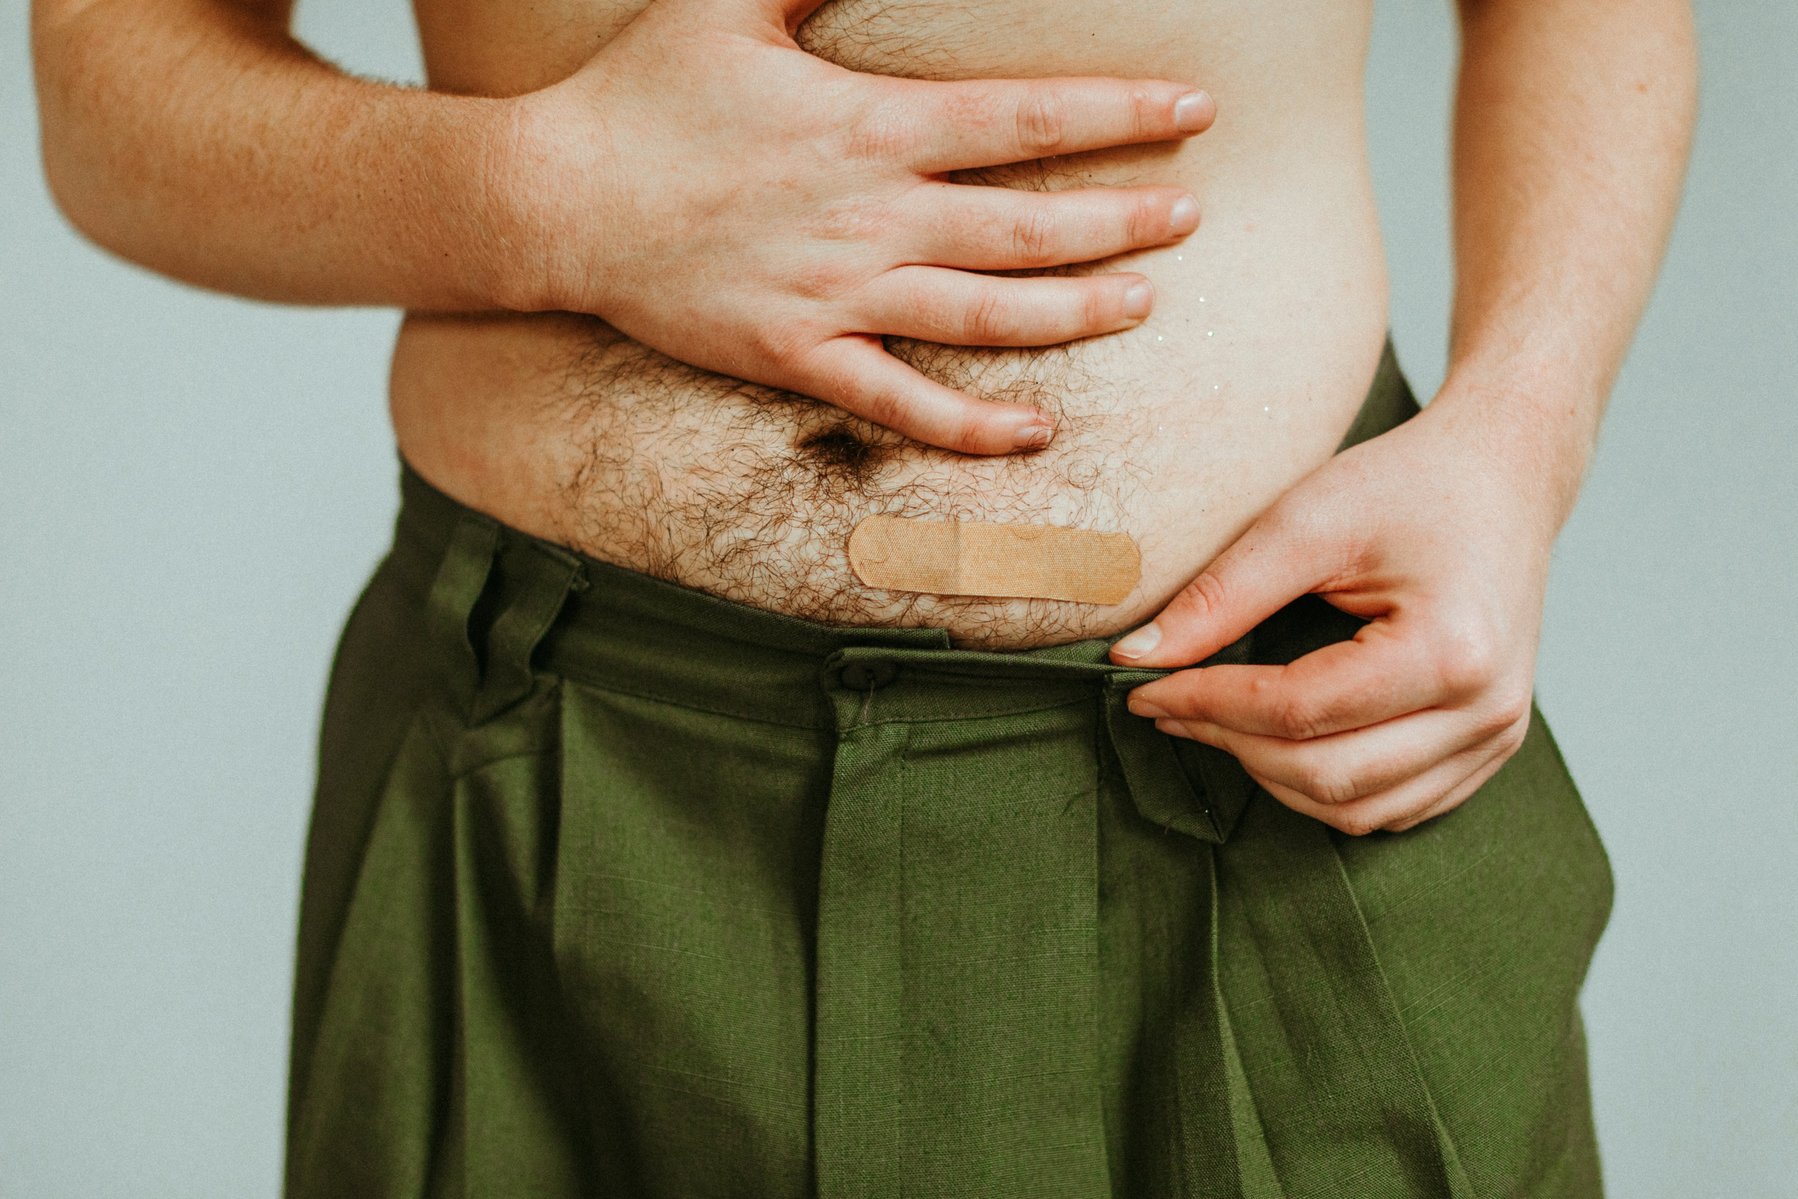 a close-up of Ryan Baker's belly. His belly is pale, covered with dark hair, and has a bandaid covering the lower left side of his belly. The bandaid is covering his injection site. He is wearing earthy green high waisted pants